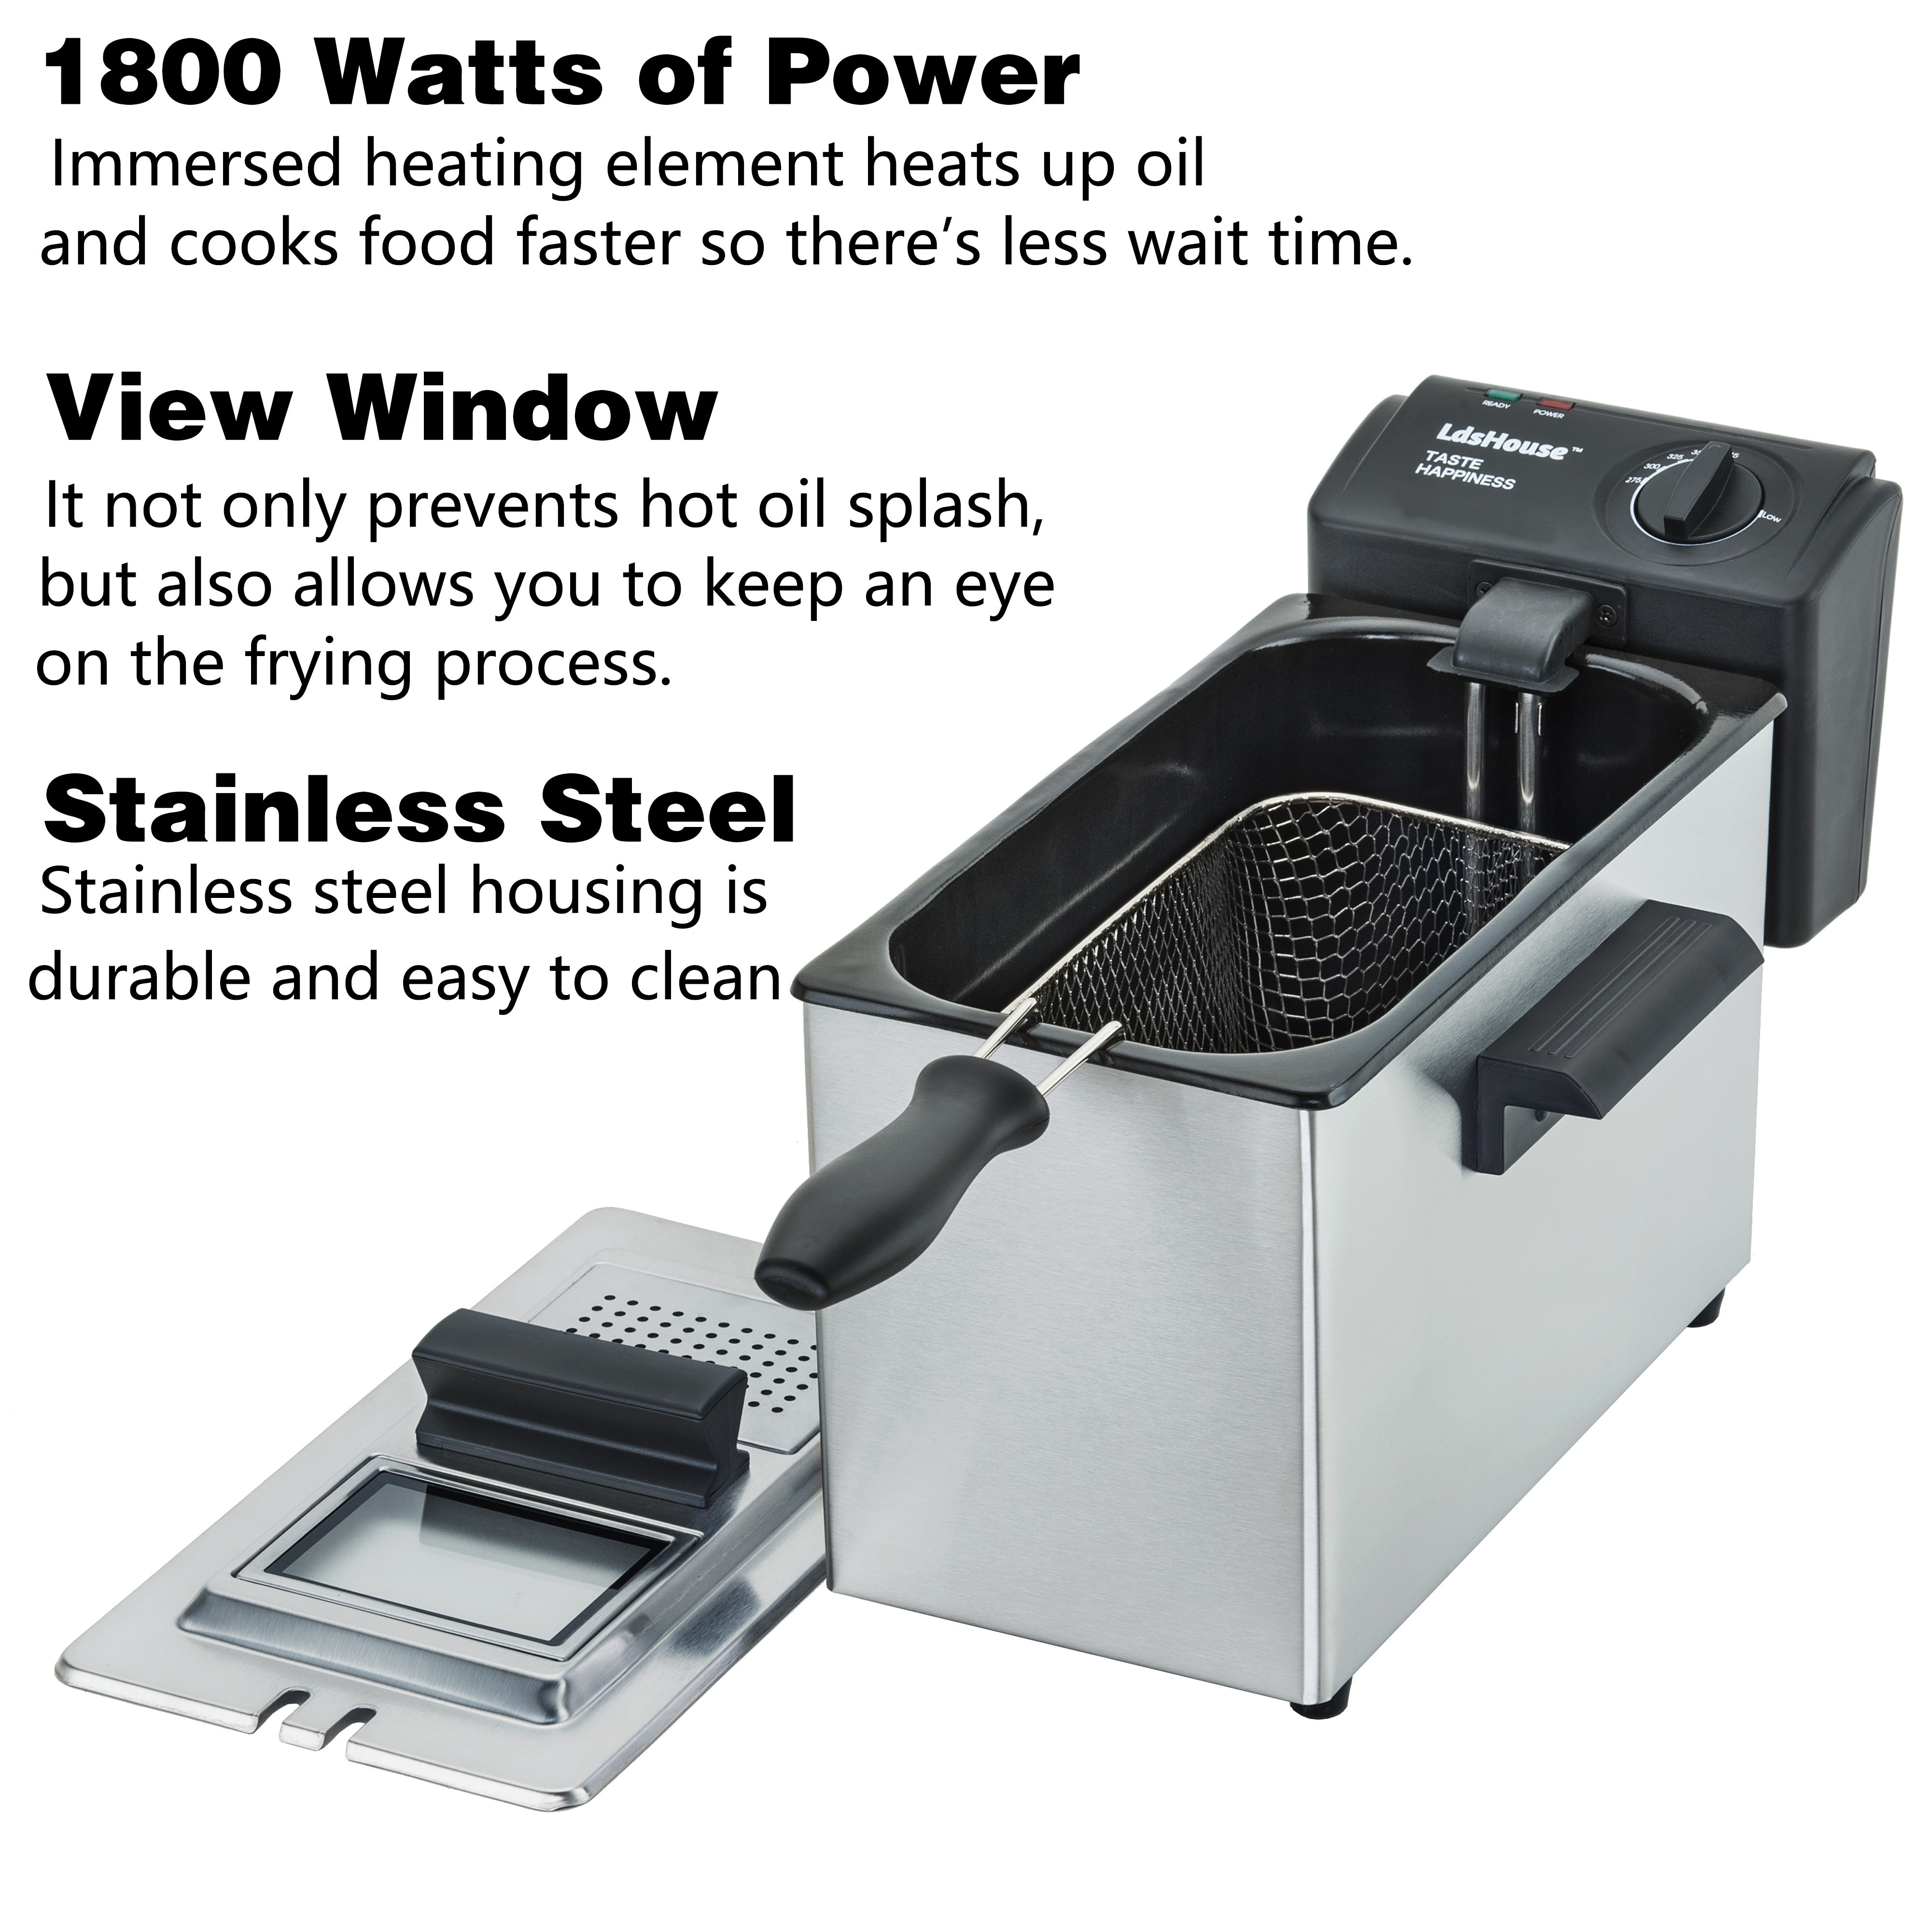 Professional stainless steel electric fryer with 6 liter capacity